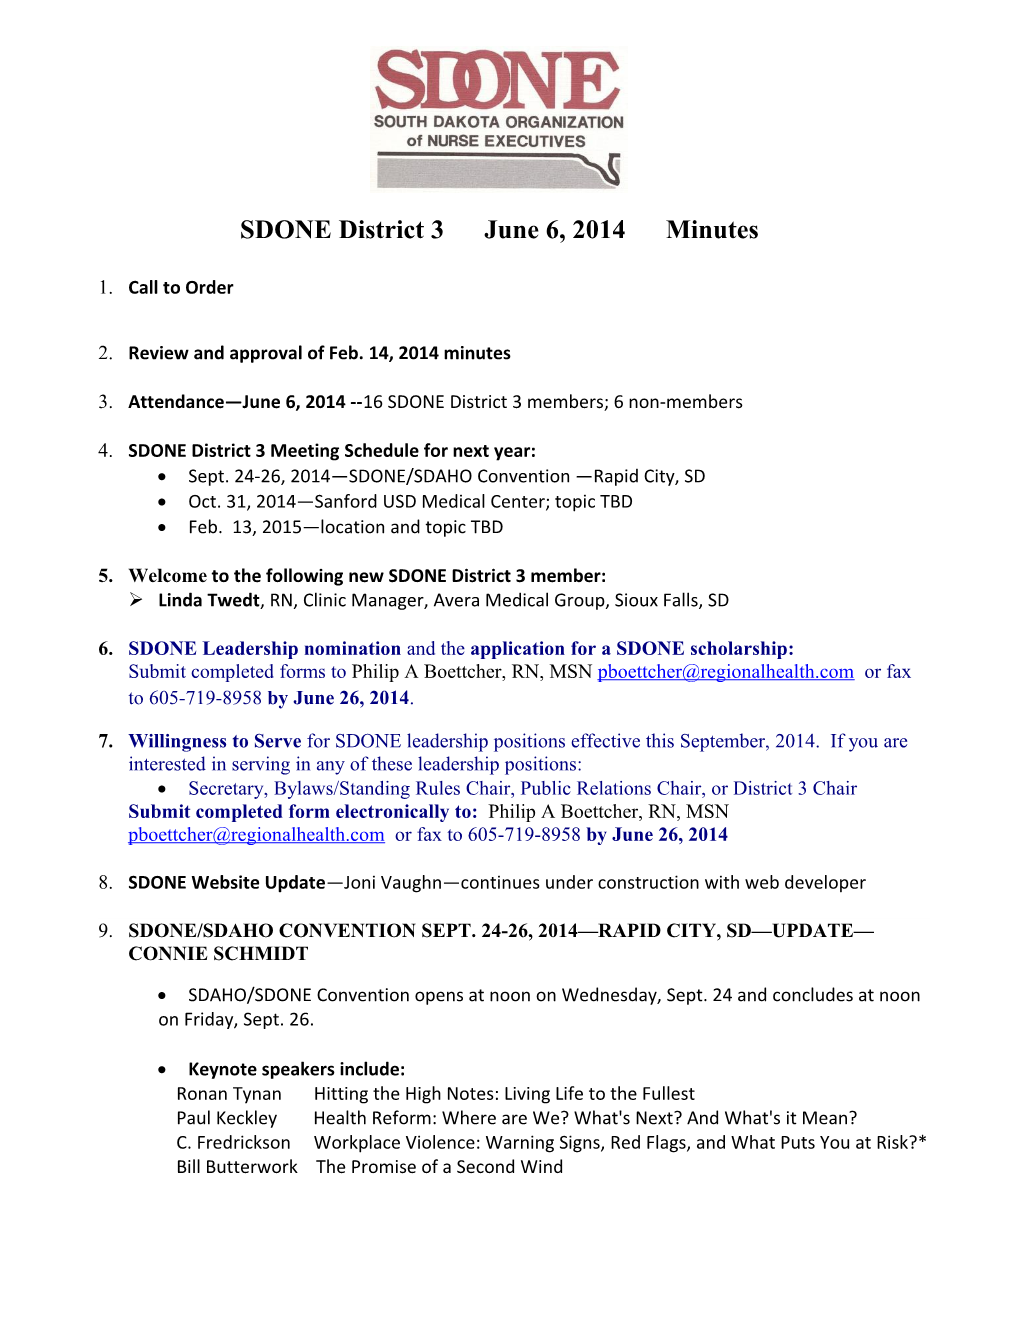 4.SDONE District 3 Meeting Schedule for Next Year